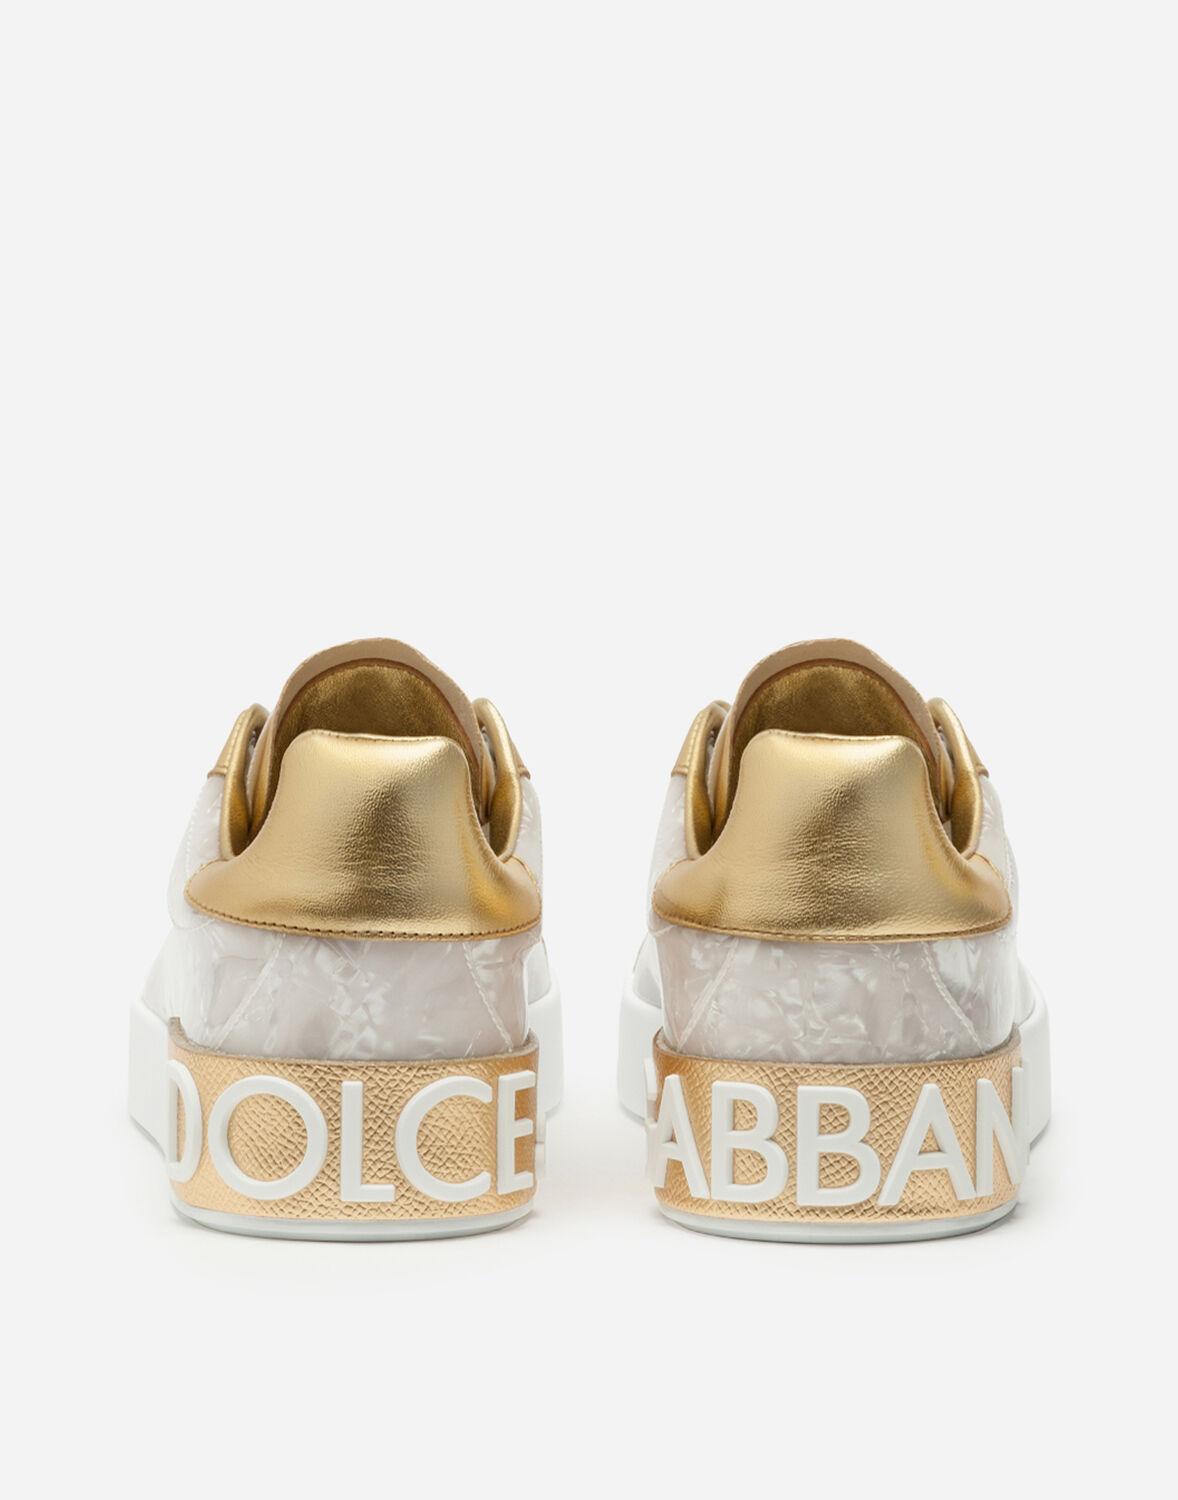 Dolce & Gabbana Portofino Mother-of-pearl Sneakers In Patent Leather in  White | Lyst